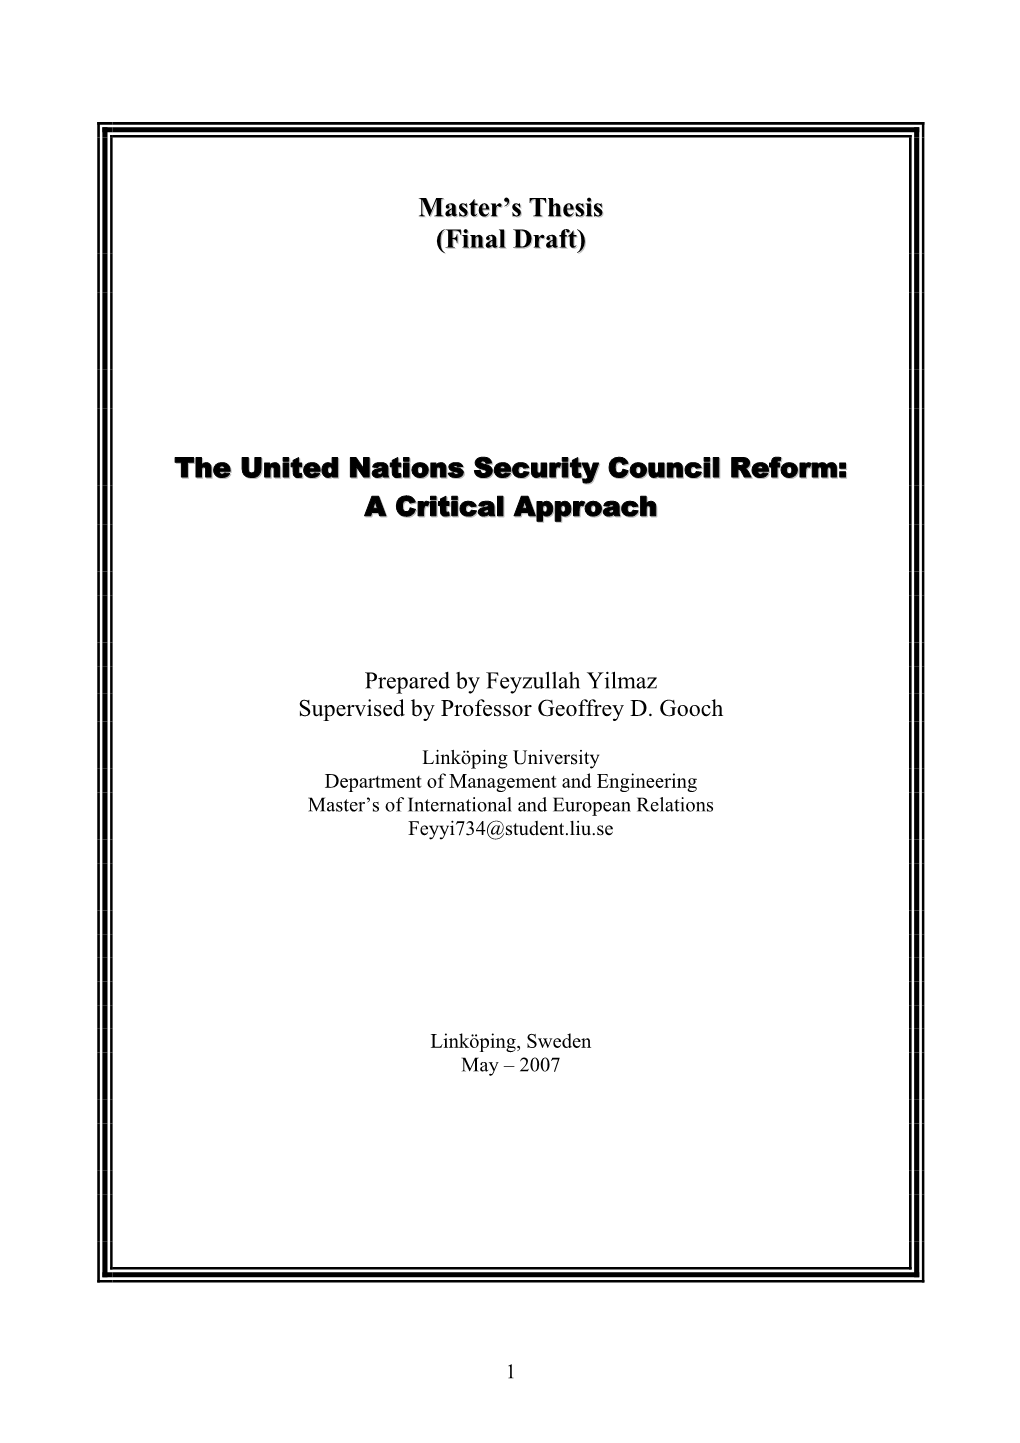 (Final Draft) the United Nations Security Council Reform: a Critical Approach